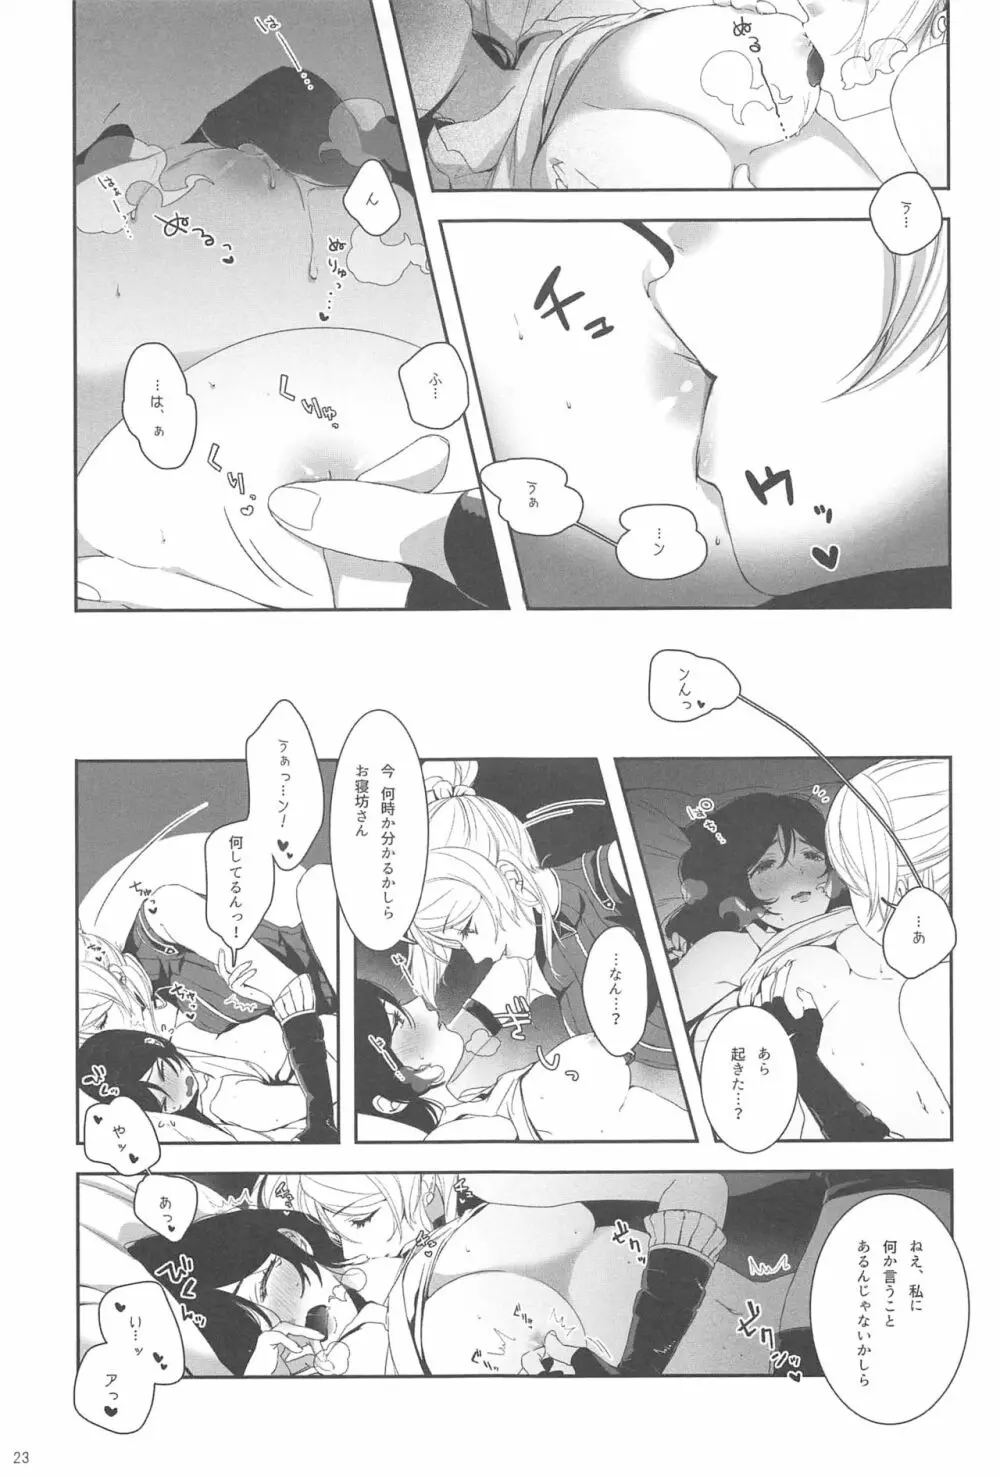 Re:デーデッデー!!!!!!!! - page24